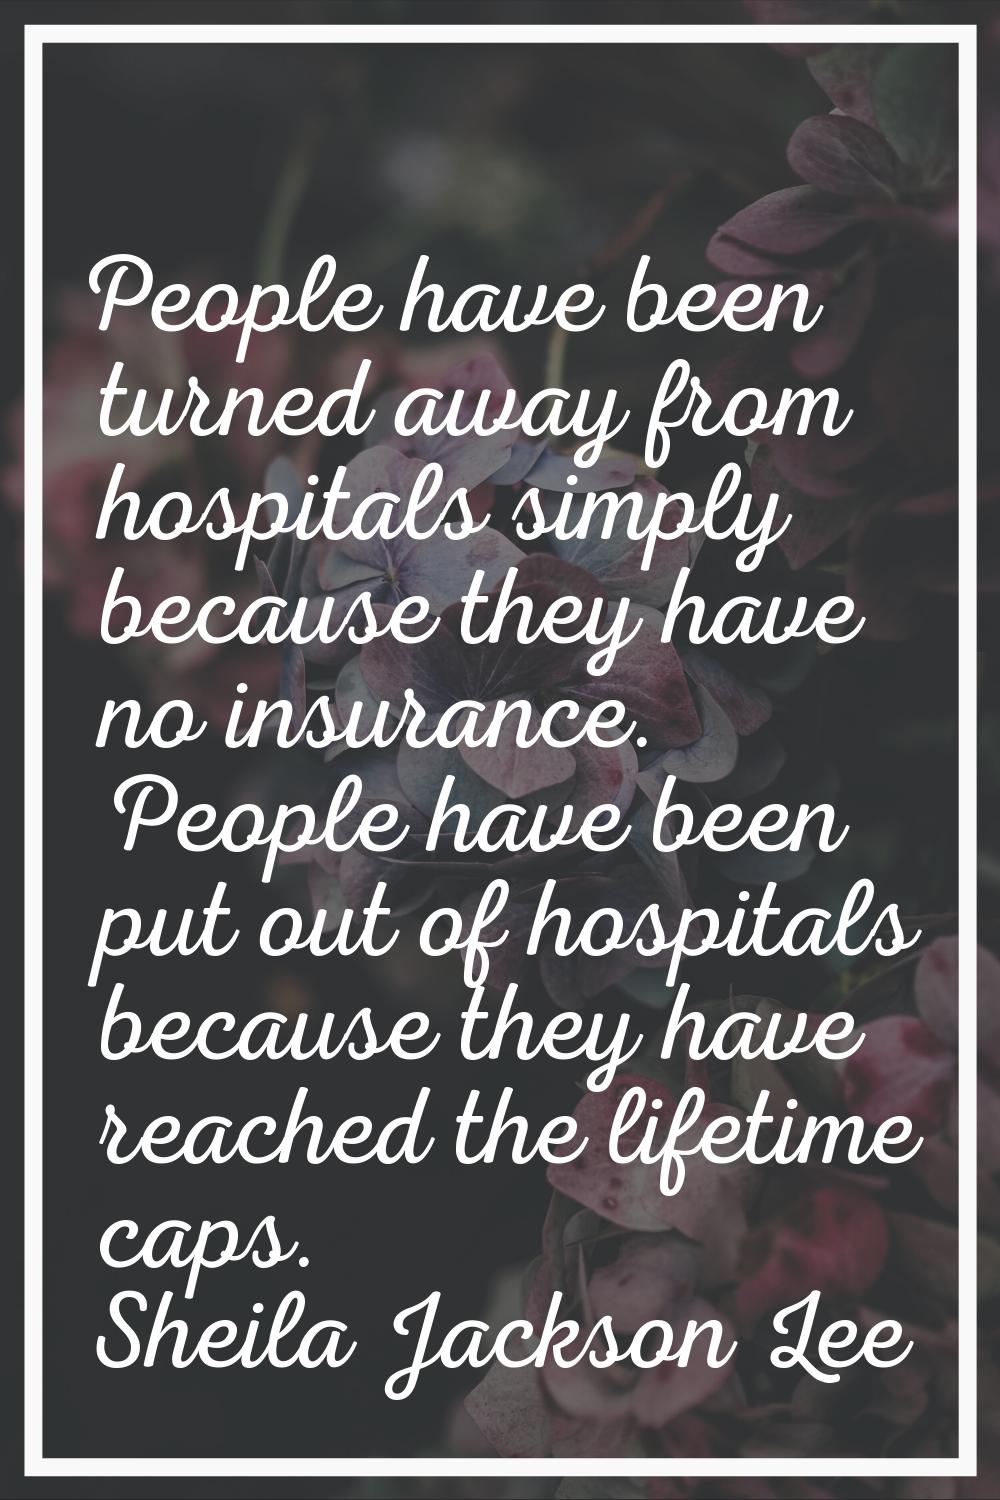 People have been turned away from hospitals simply because they have no insurance. People have been